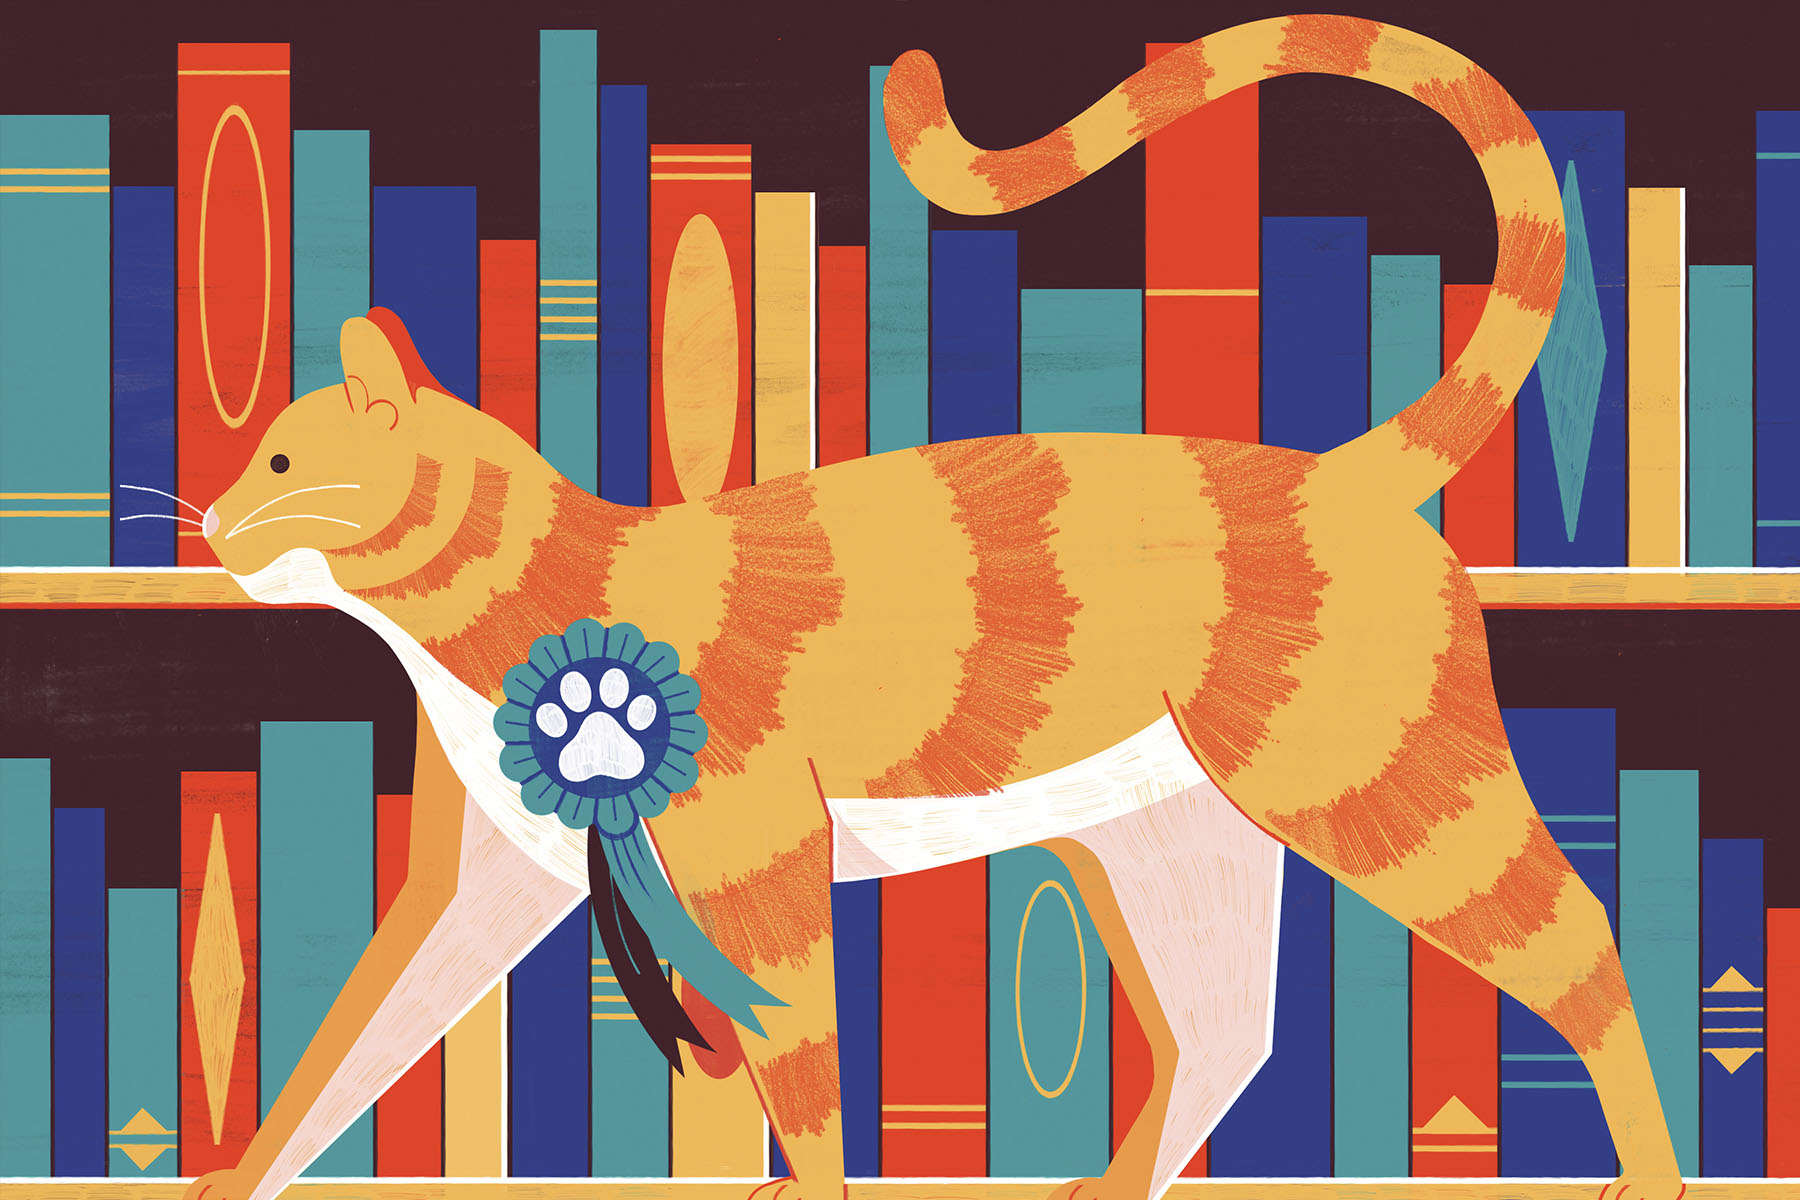 An illustration of a stripy ginger cat standing in front of a bookcase full of books.